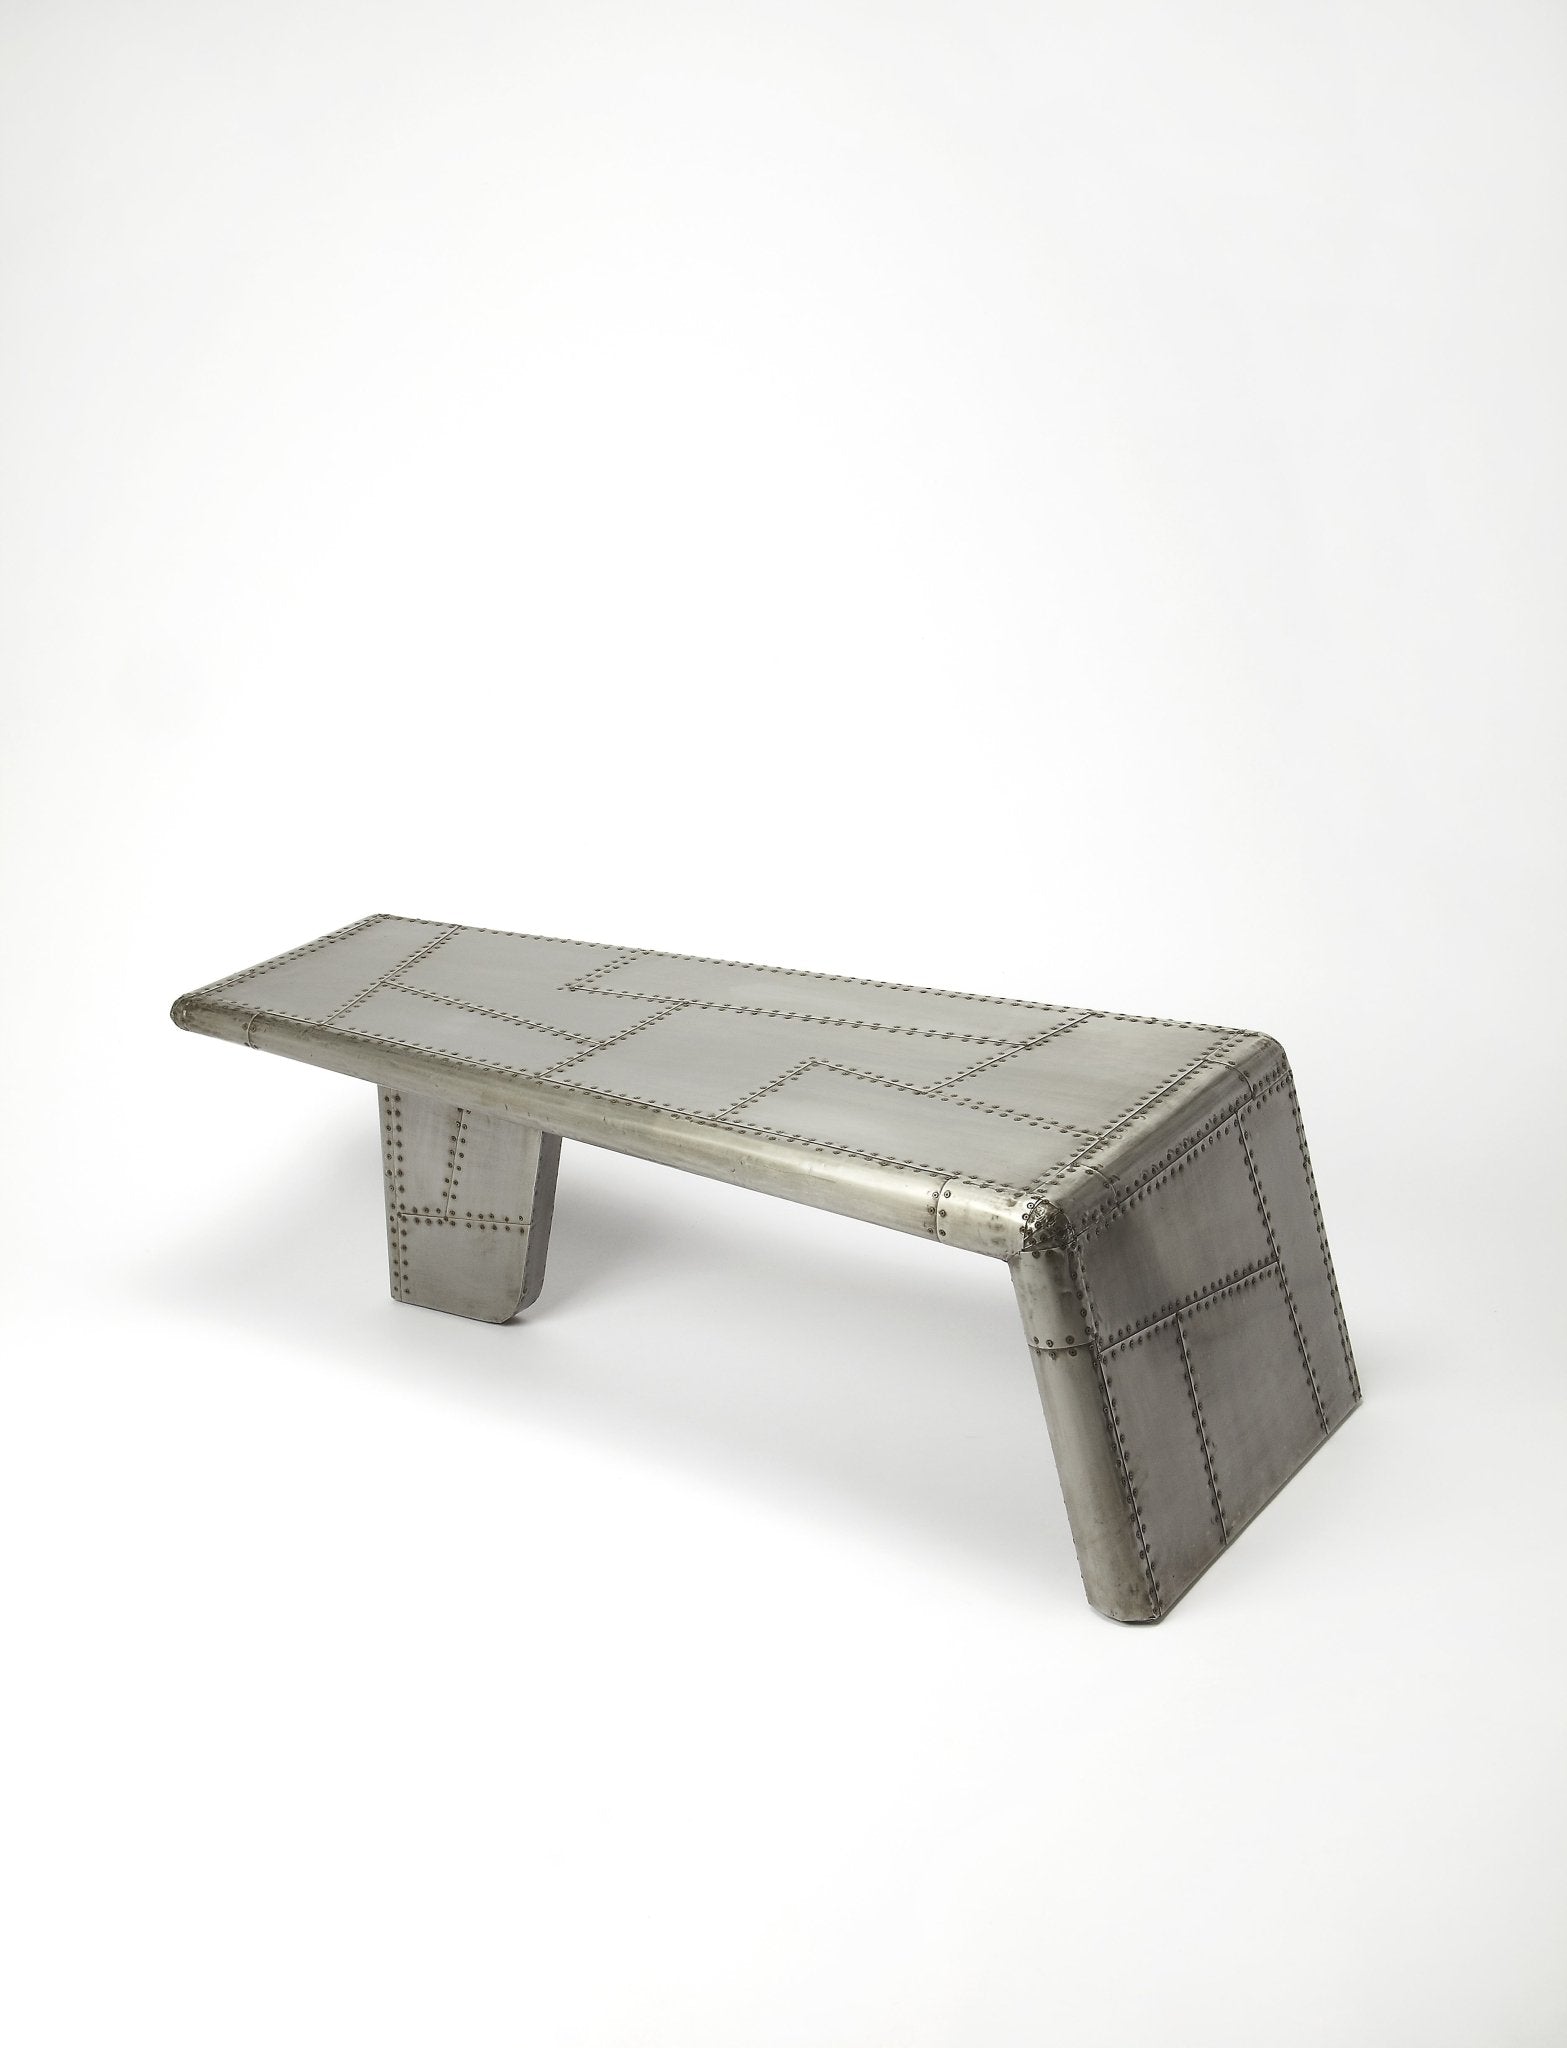 Yeager Aviator Cocktail Table - Furniture - Tipplergoods